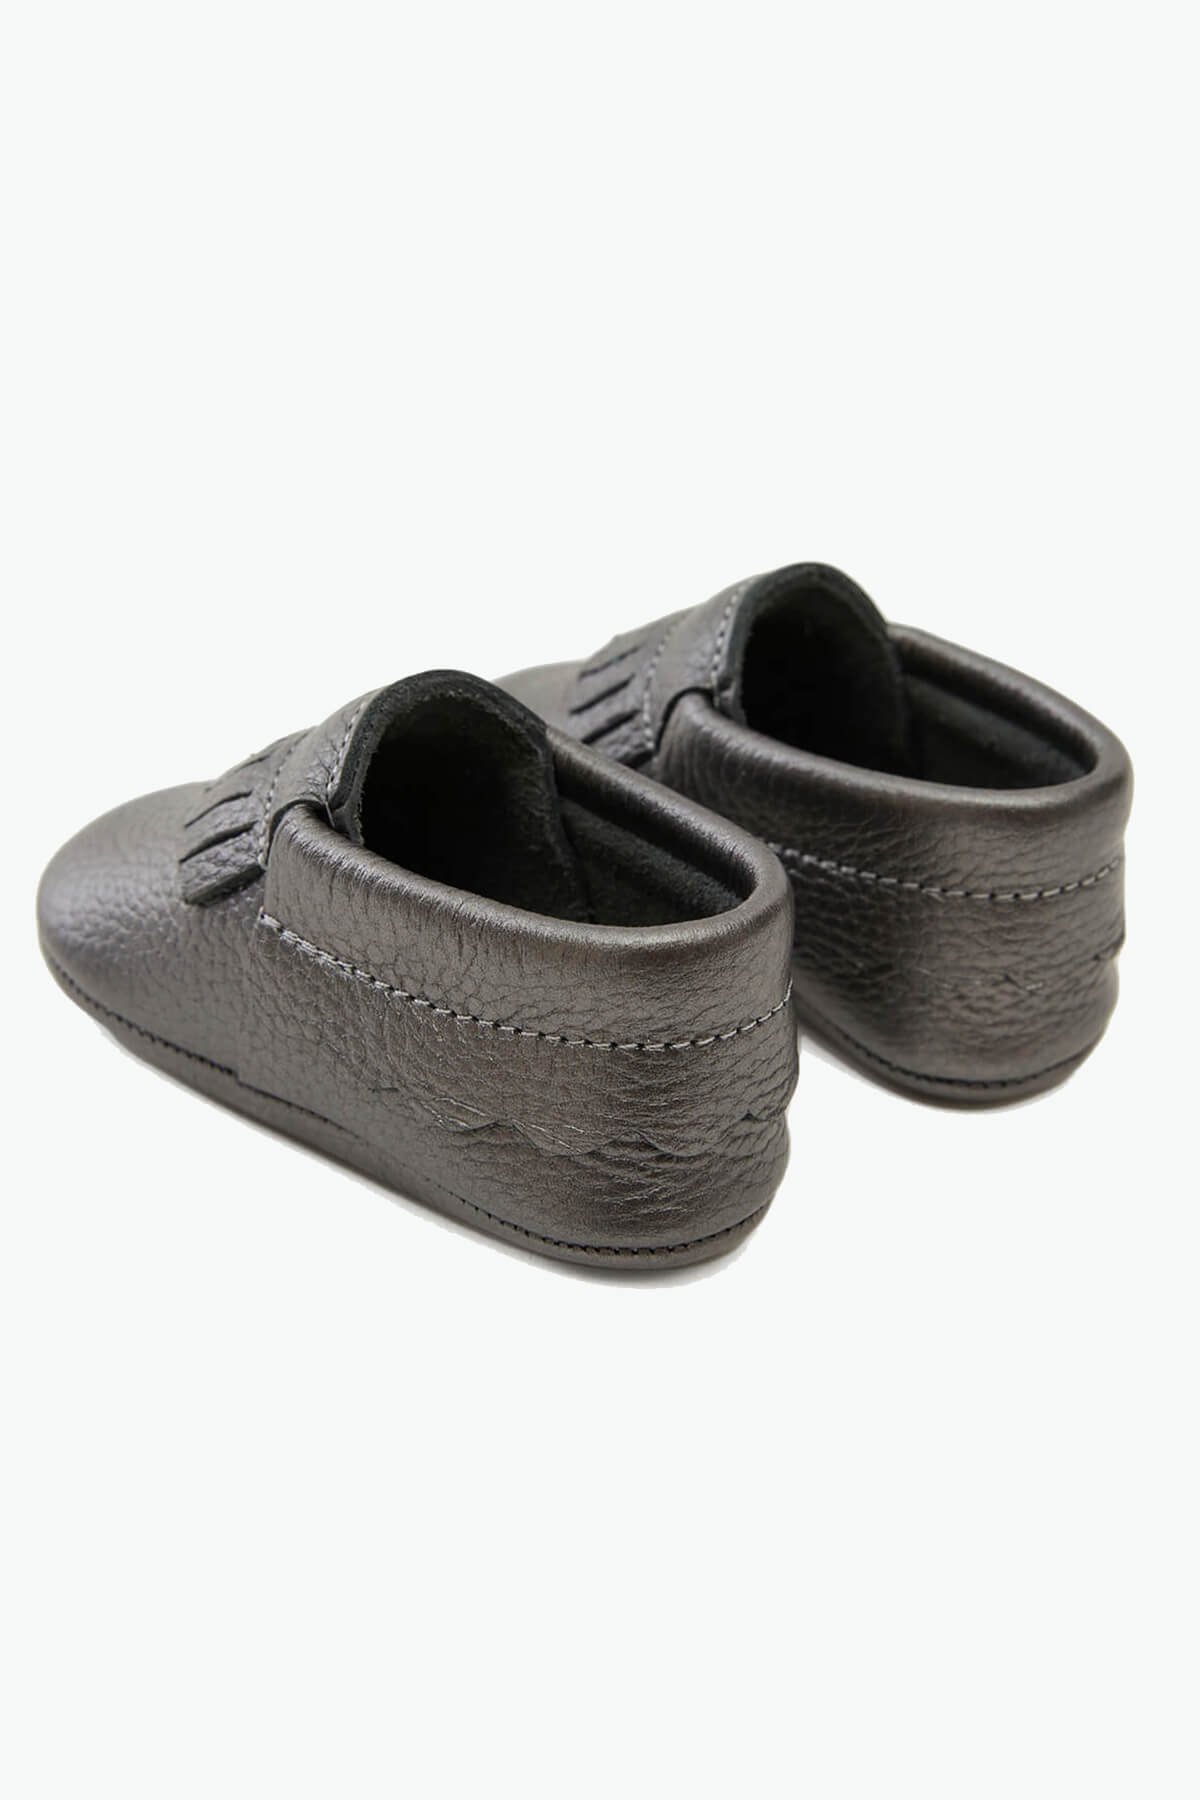 Genuine Leather Elasticated Baby Shoes Bronze